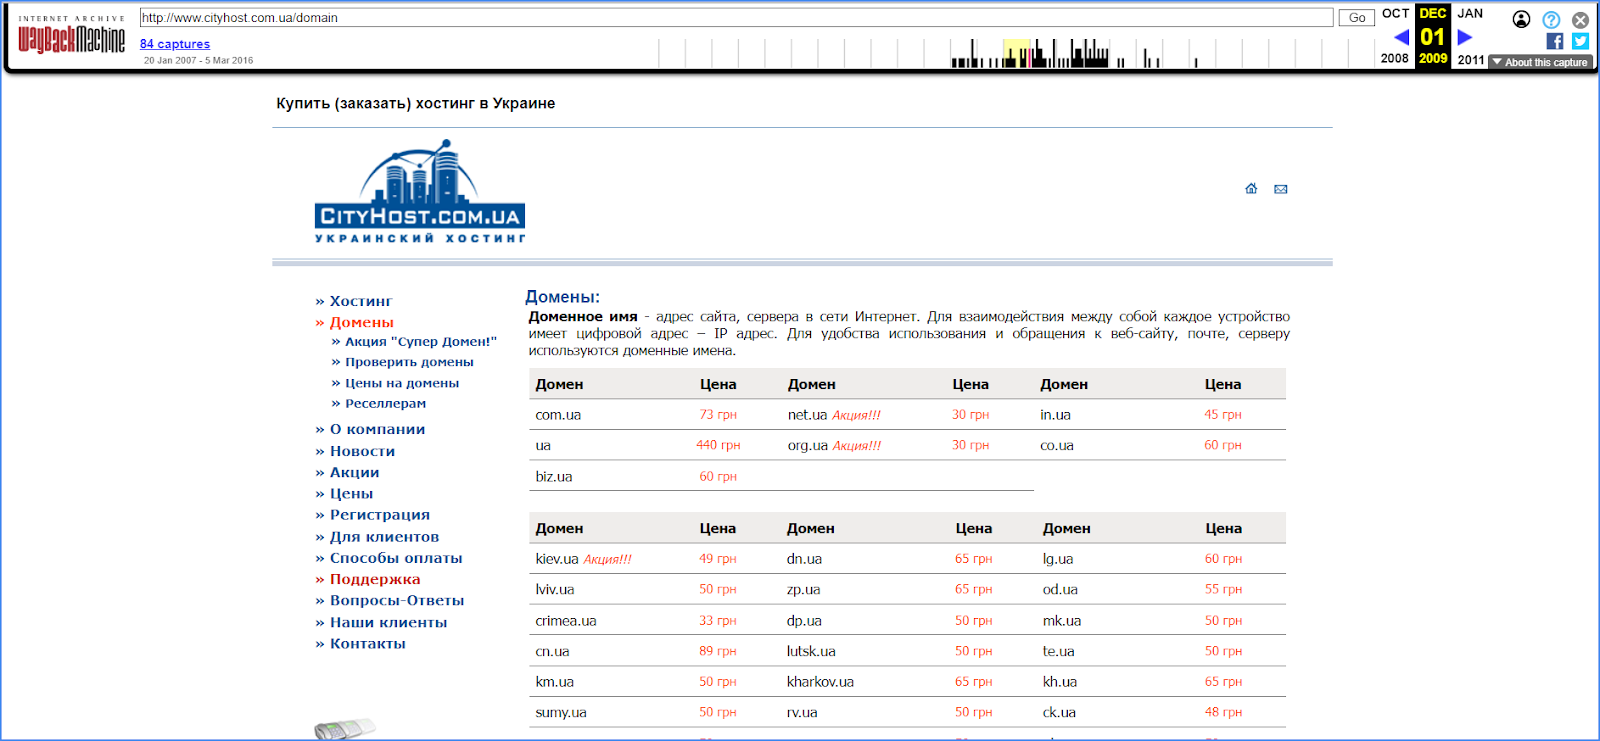 The main page of Cityhist.ua in 2009 in the wayback machine